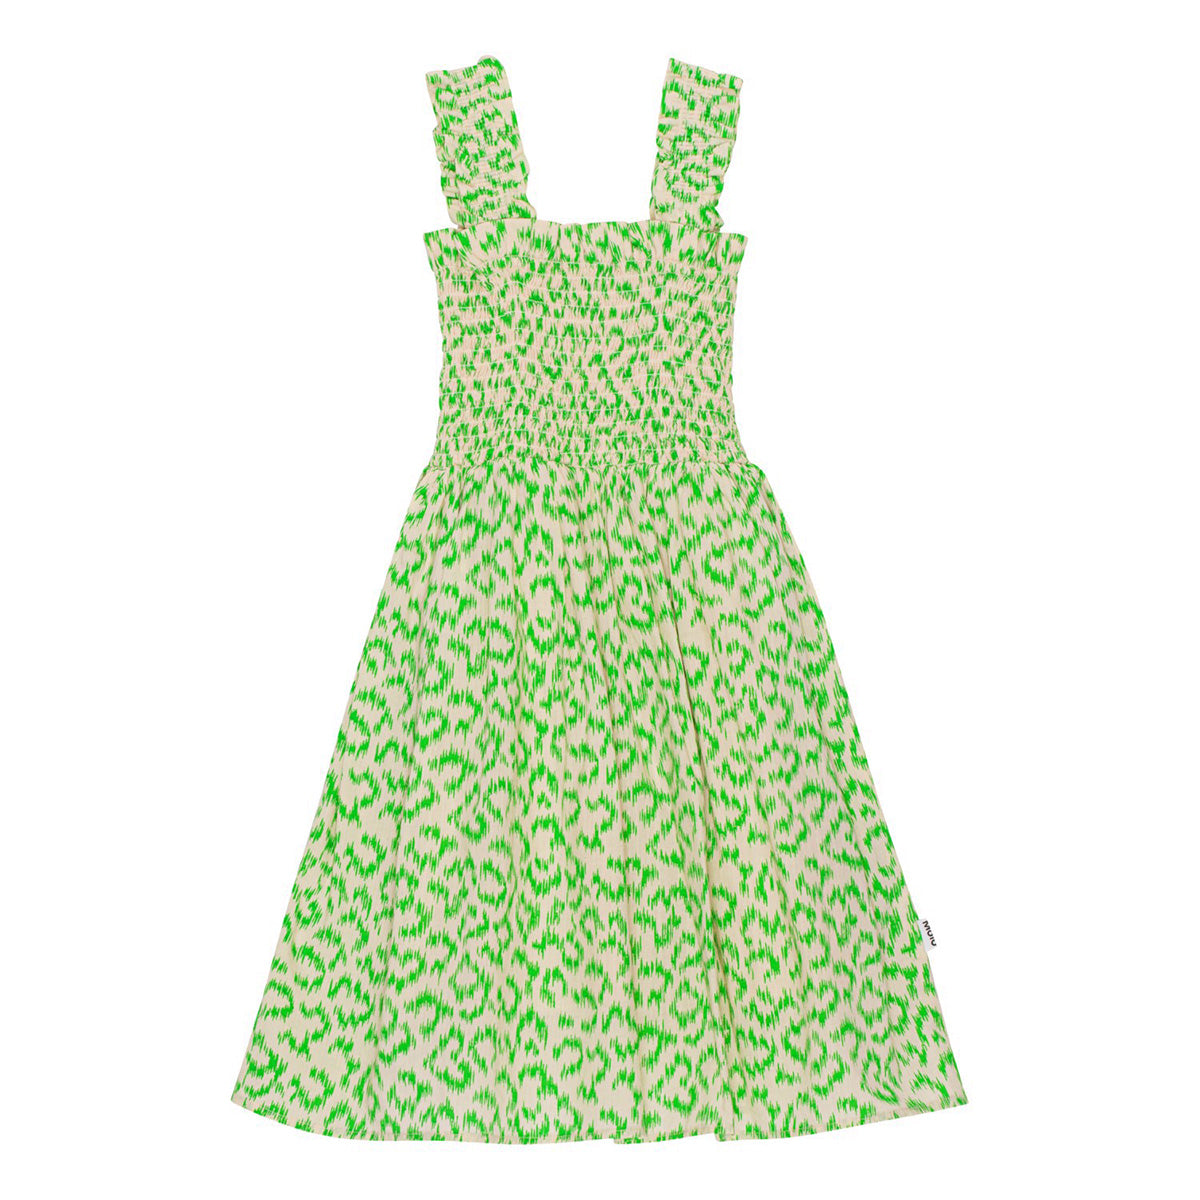 The Cippe Dress from Molo. Knee length dress in a green leopard print